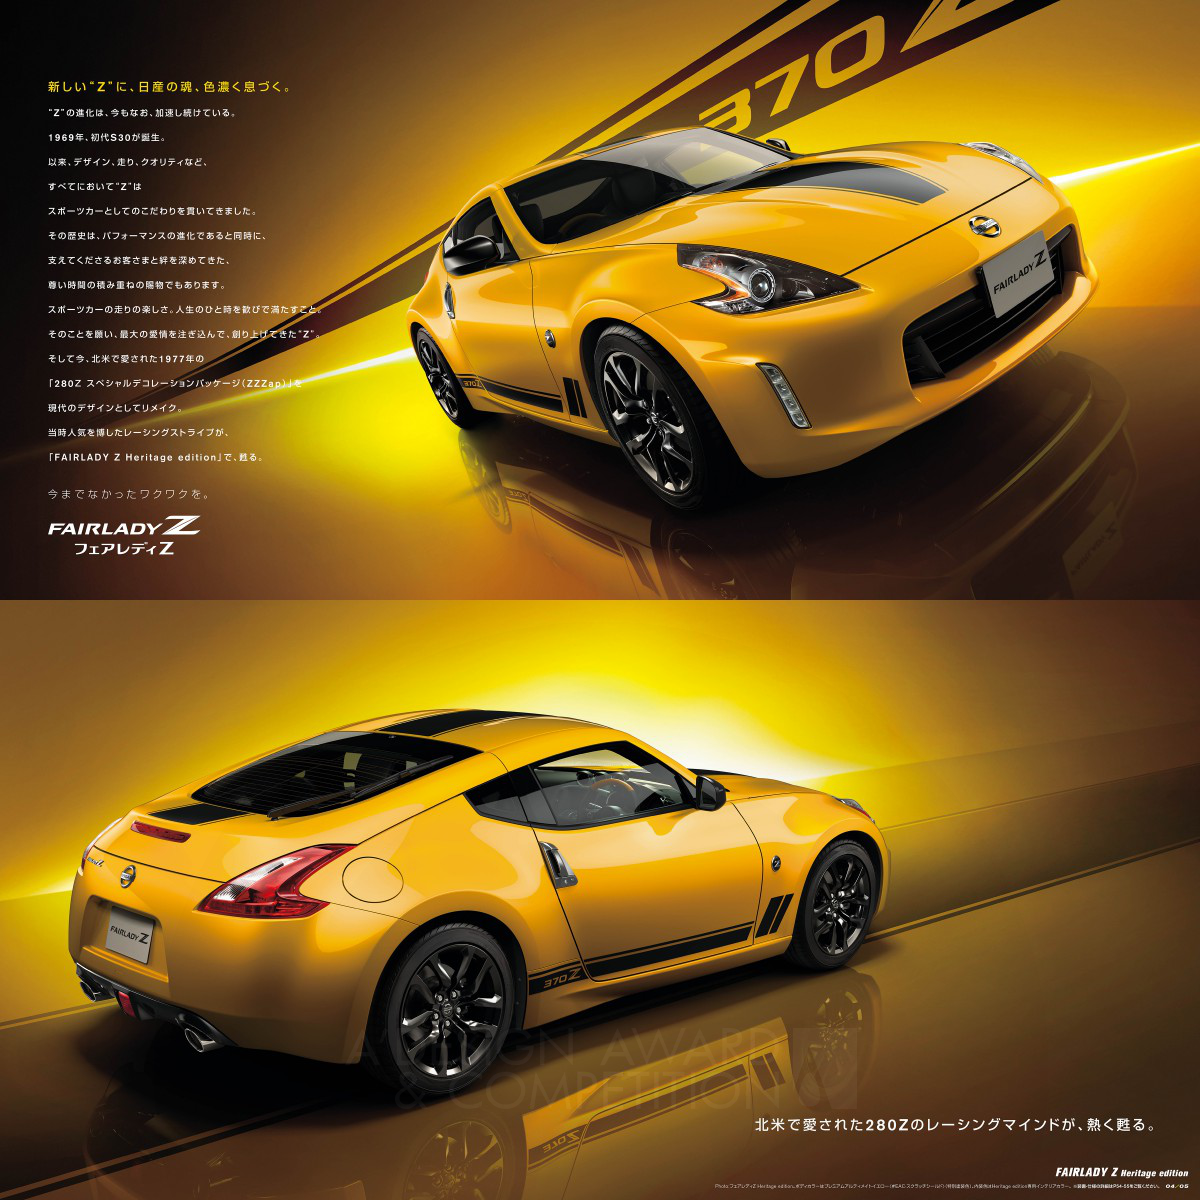 Reviving the Past with Modernity: The Nissan Fairlady Z